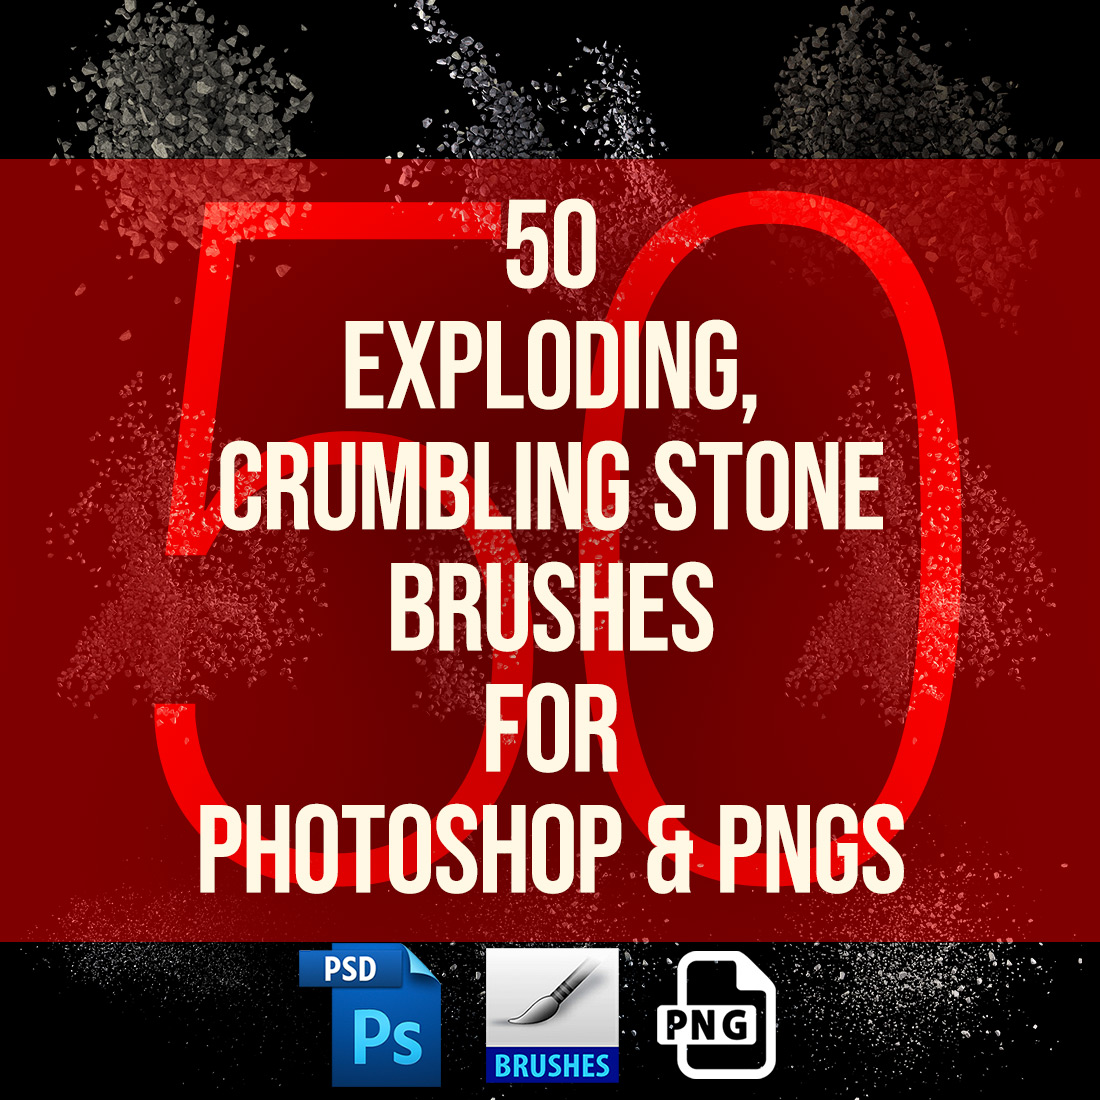 Stone Brushes Exploding for PS cover image.